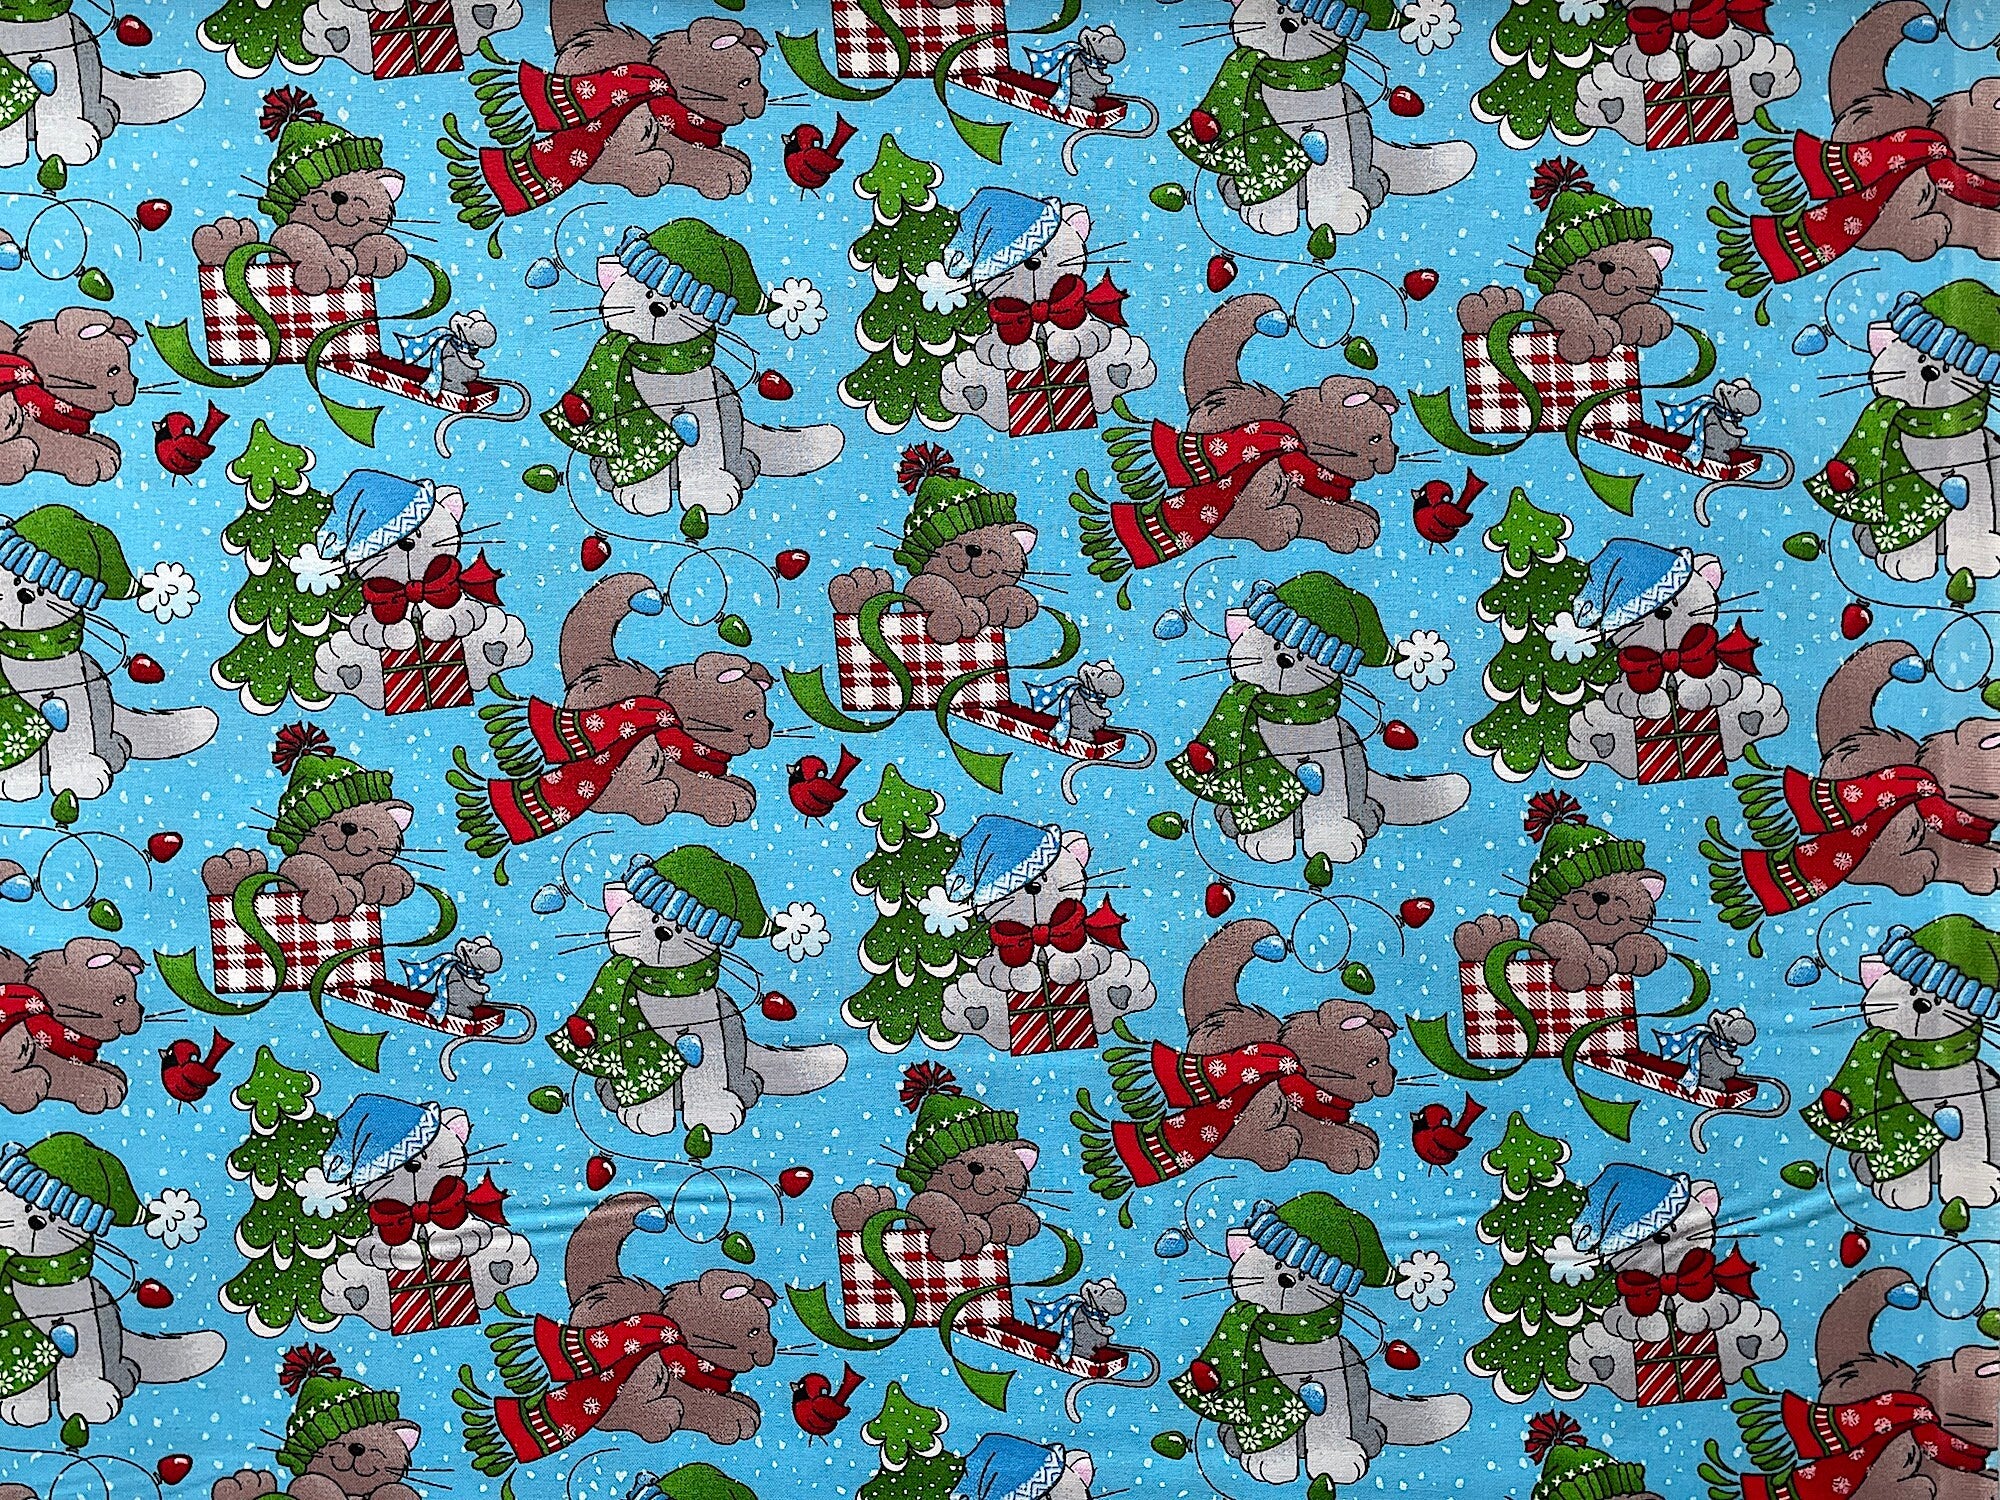 This Christmas fabric is covered with Cats. The cats are looking at birds, playing in boxes, sitting by trees and surrounded by lights.